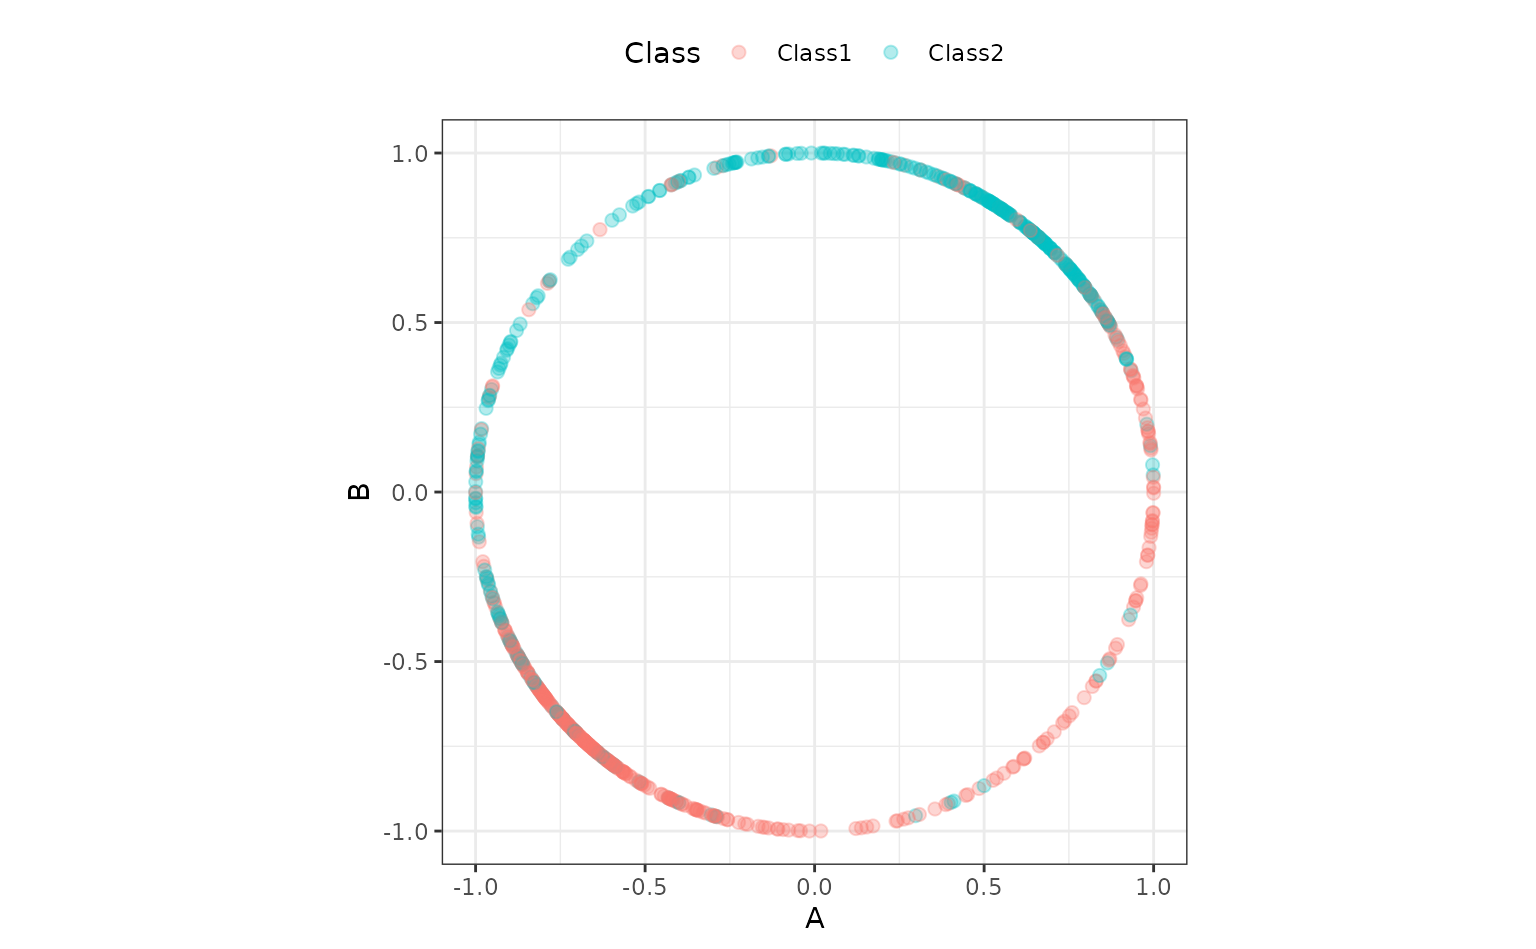 Scatter chart. A along the x-axis, B along the y-axis. Two classes class1 and class2 are colors red and blue respectively. All points are on the unit circle. with most of the blue points having a higher B value.